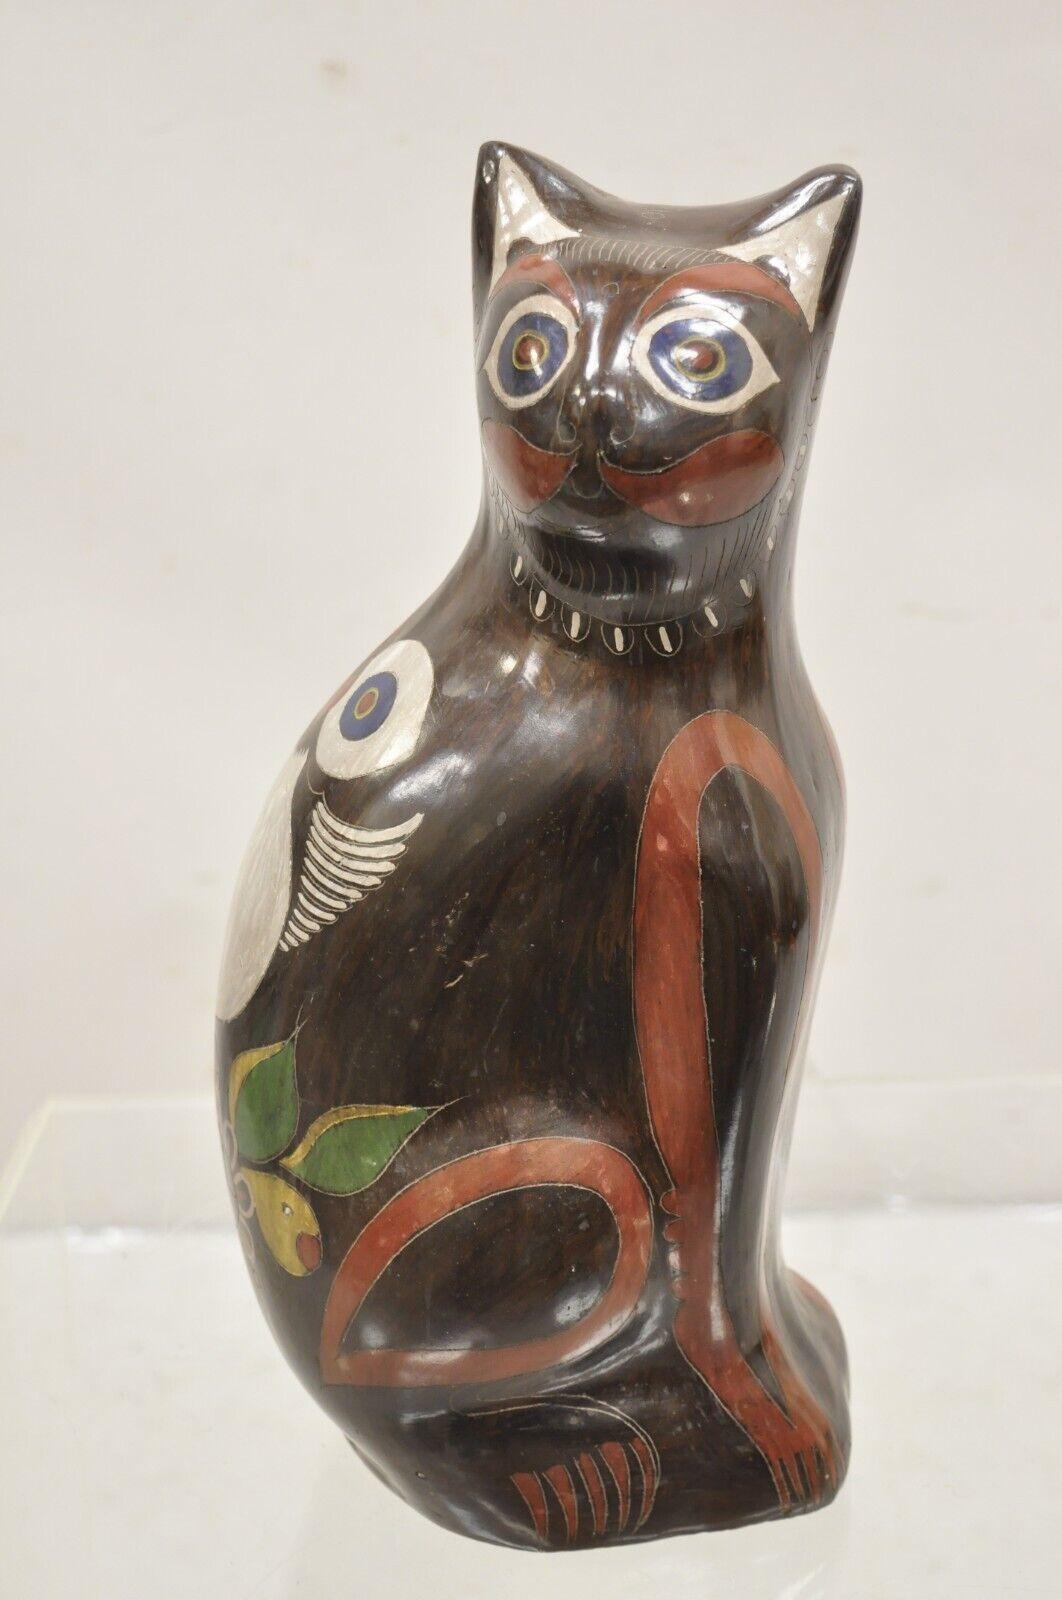 Vintage Mexican Brown Painted Ceramic Pottery Cat with Owl Design Figure Statue. Circa Mid to Late 20th Century. Measurements: 14